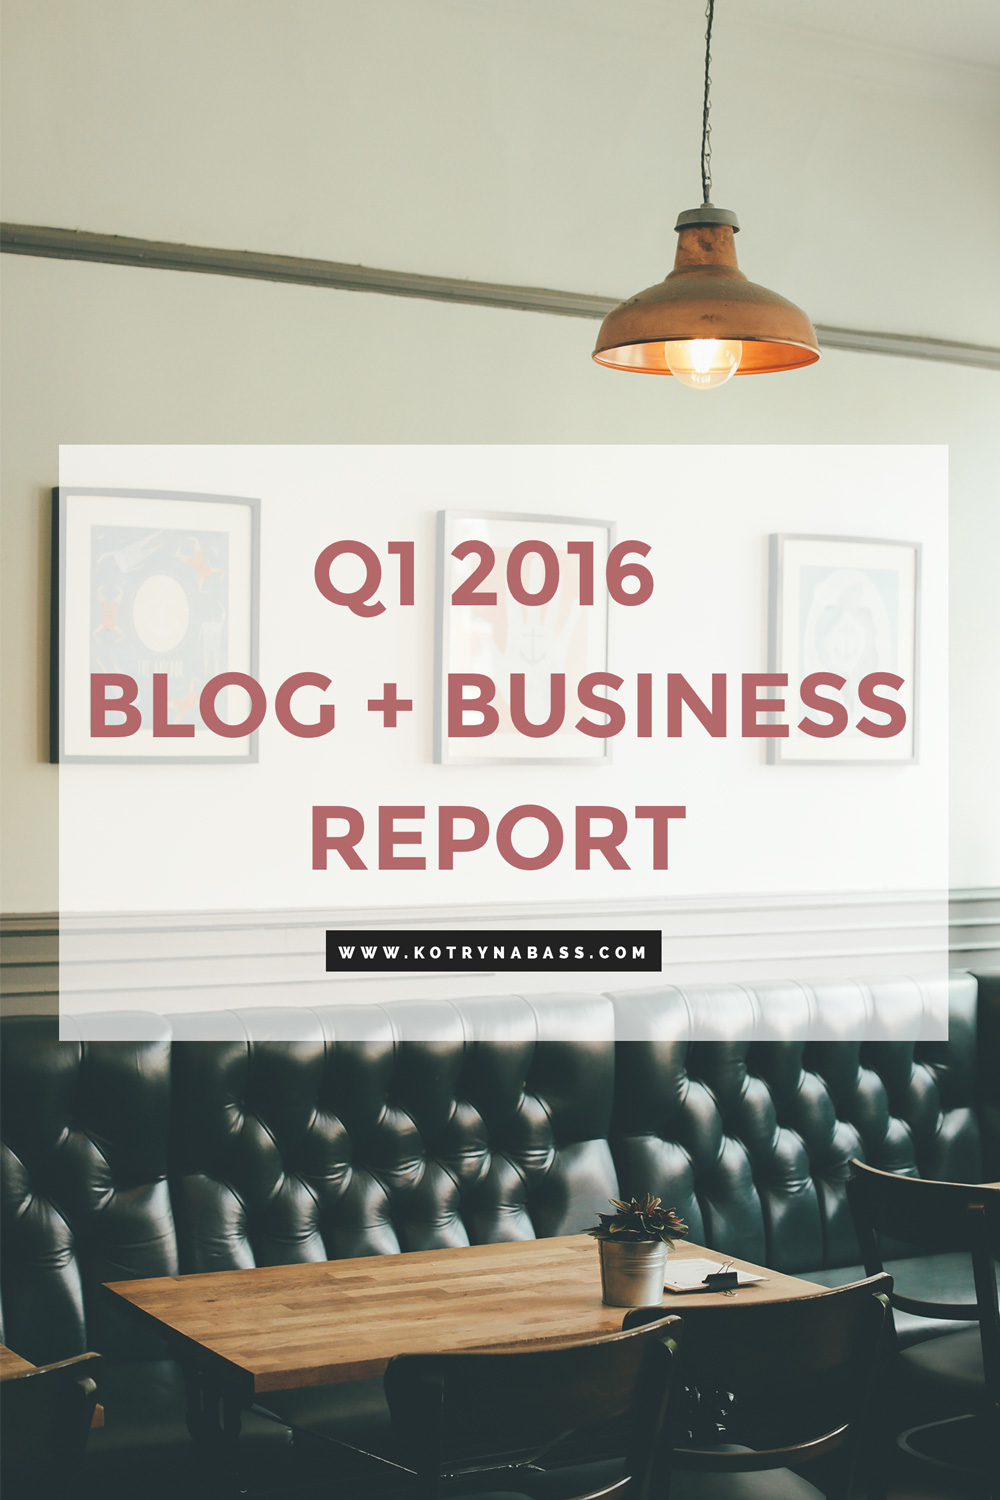 2016 is definitely the year of growth for my blog + business & I'm very excited to share my ups & downs with you all. For this reason, and simply because I would love to keep record of my stats here o the blog, I decided to share my first Blog + Business report with you all. Here is the summary of how I did in the first quarter of 2016.